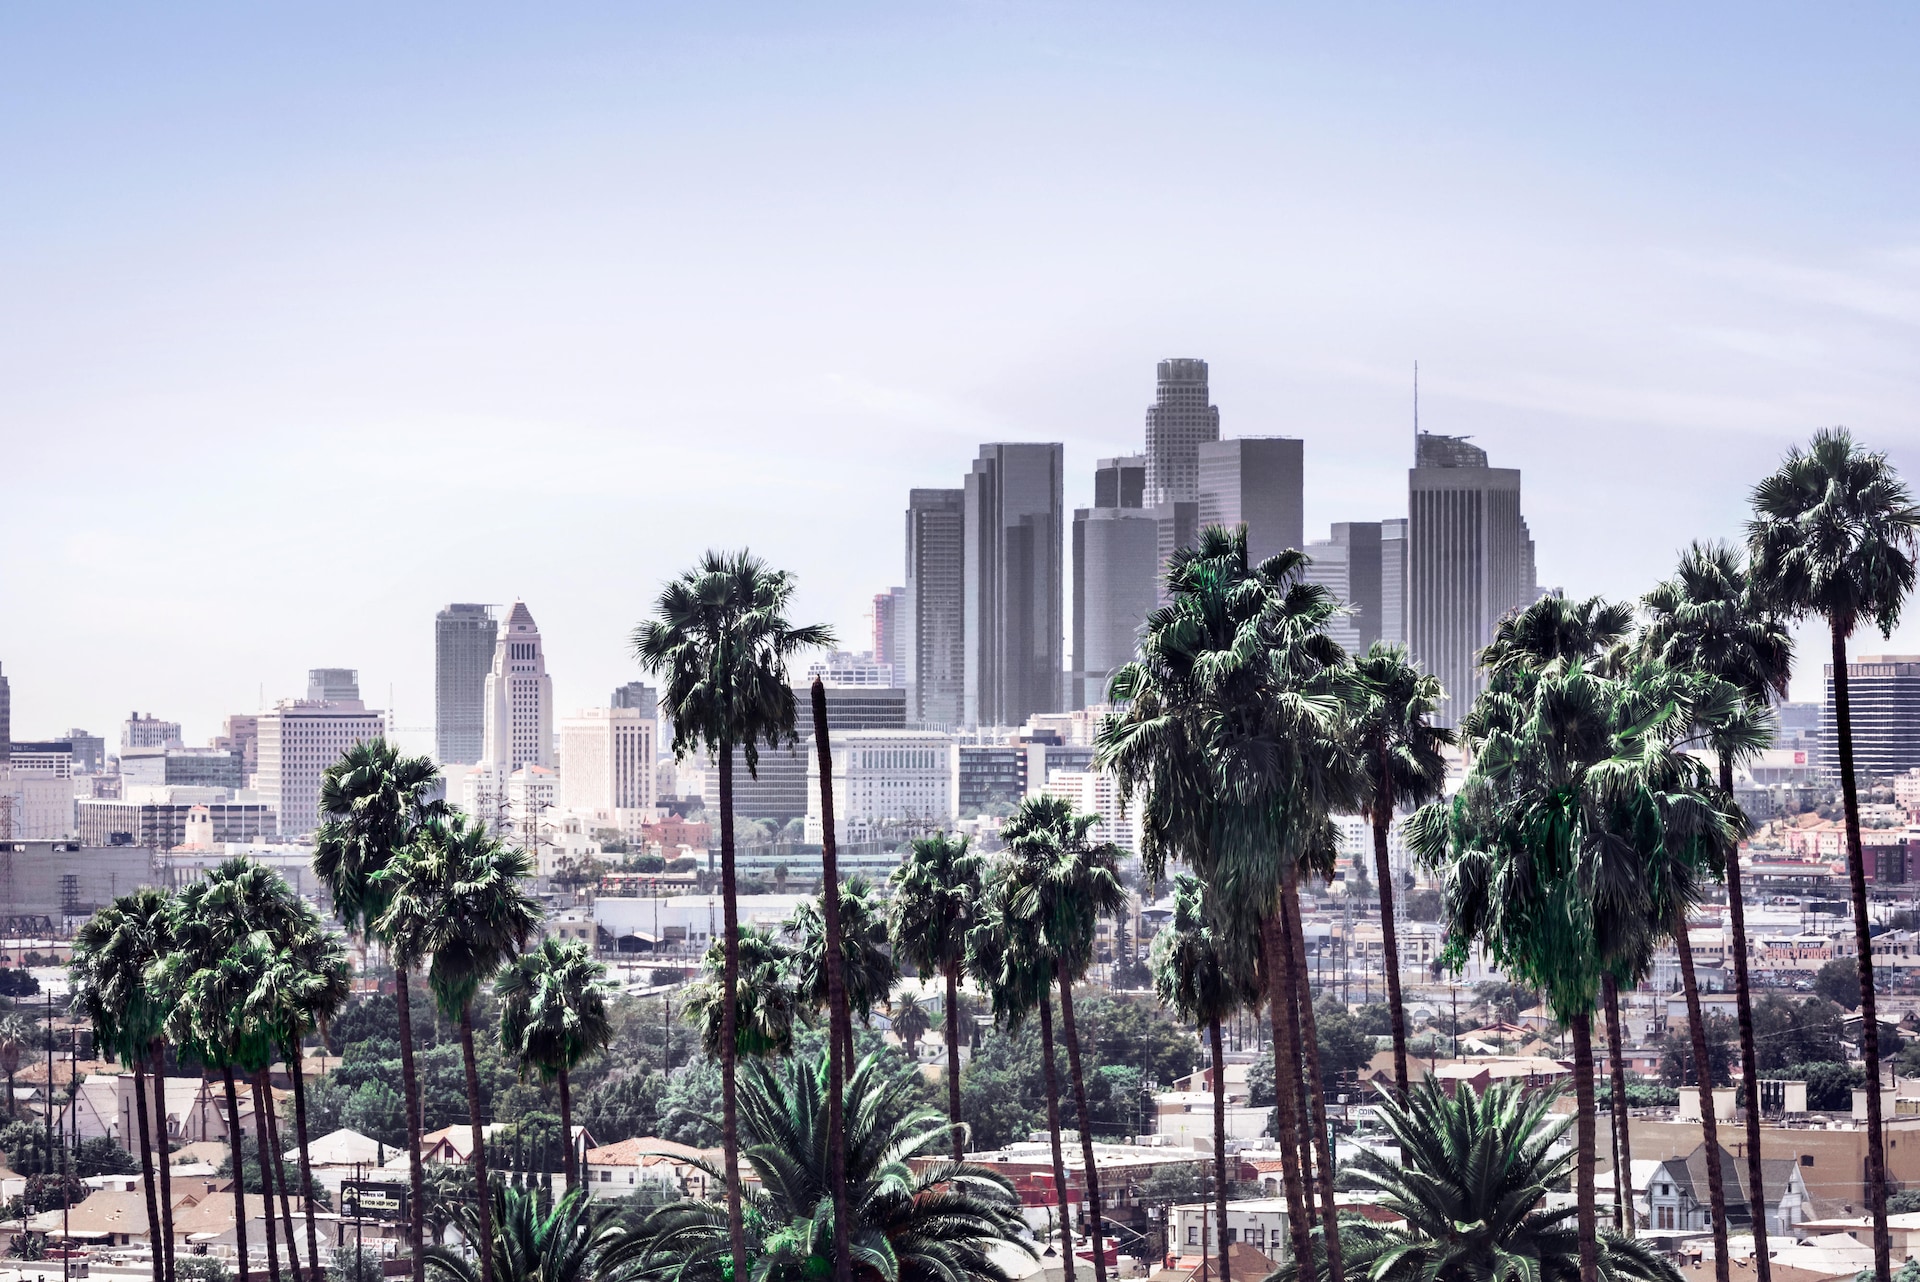 Formindske Airfield Fortolke Explore Los Angeles like a local: Top 10 tips by an LA resident | Finnair  United States